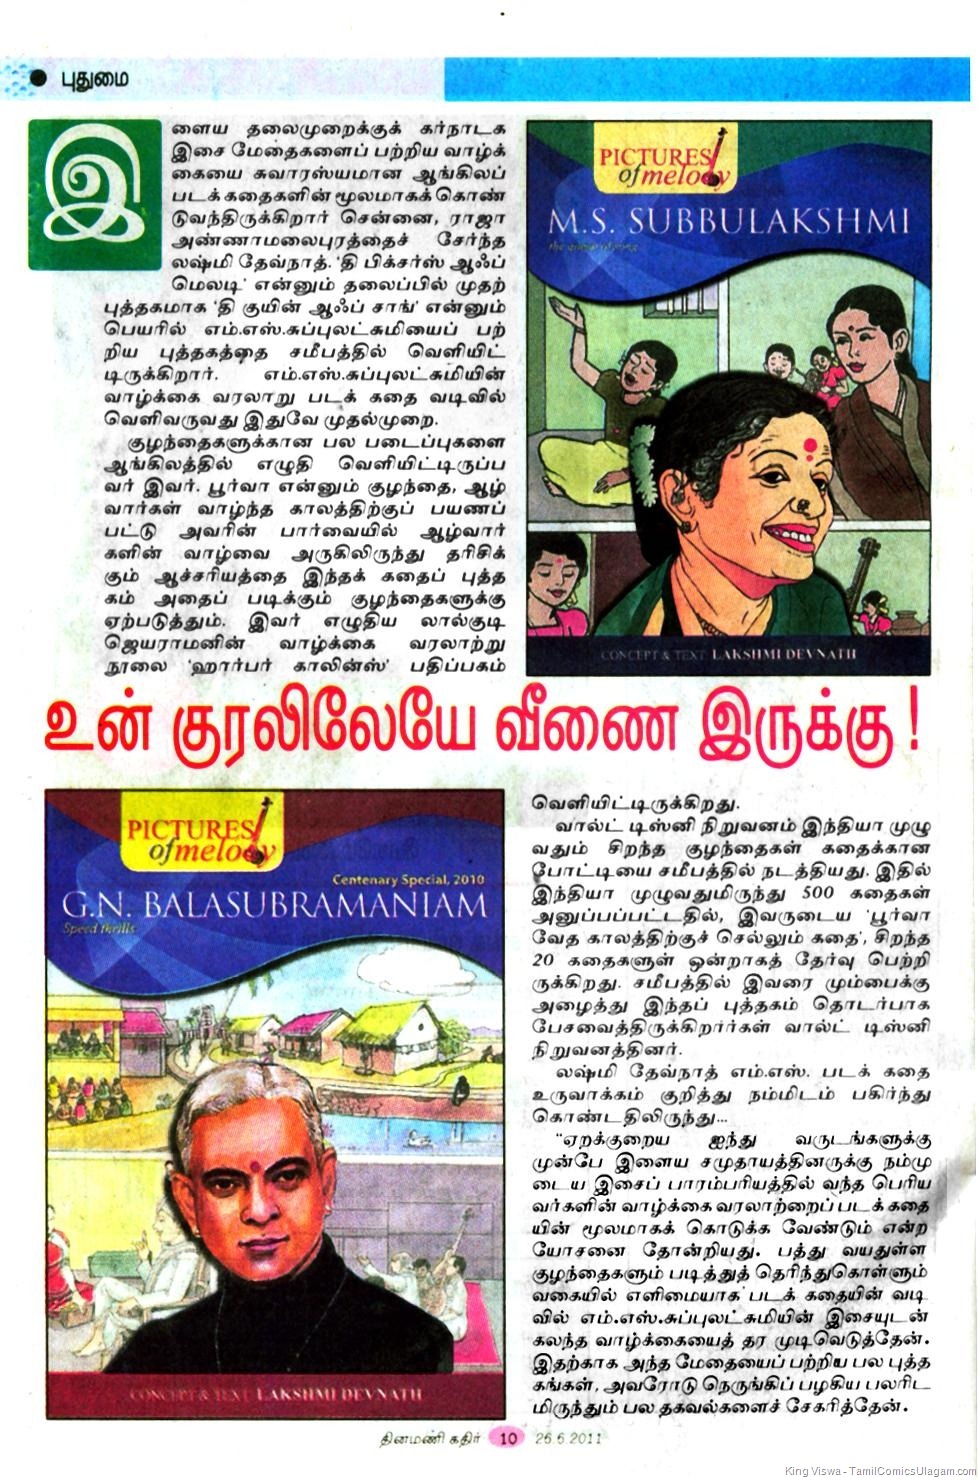 [DinaMani%2520Kathir%2520Weekly%2520Supplement%2520to%2520Tamil%2520Daily%2520Dinamani%2520Dated%252026062011%2520Page%252001%255B4%255D.jpg]